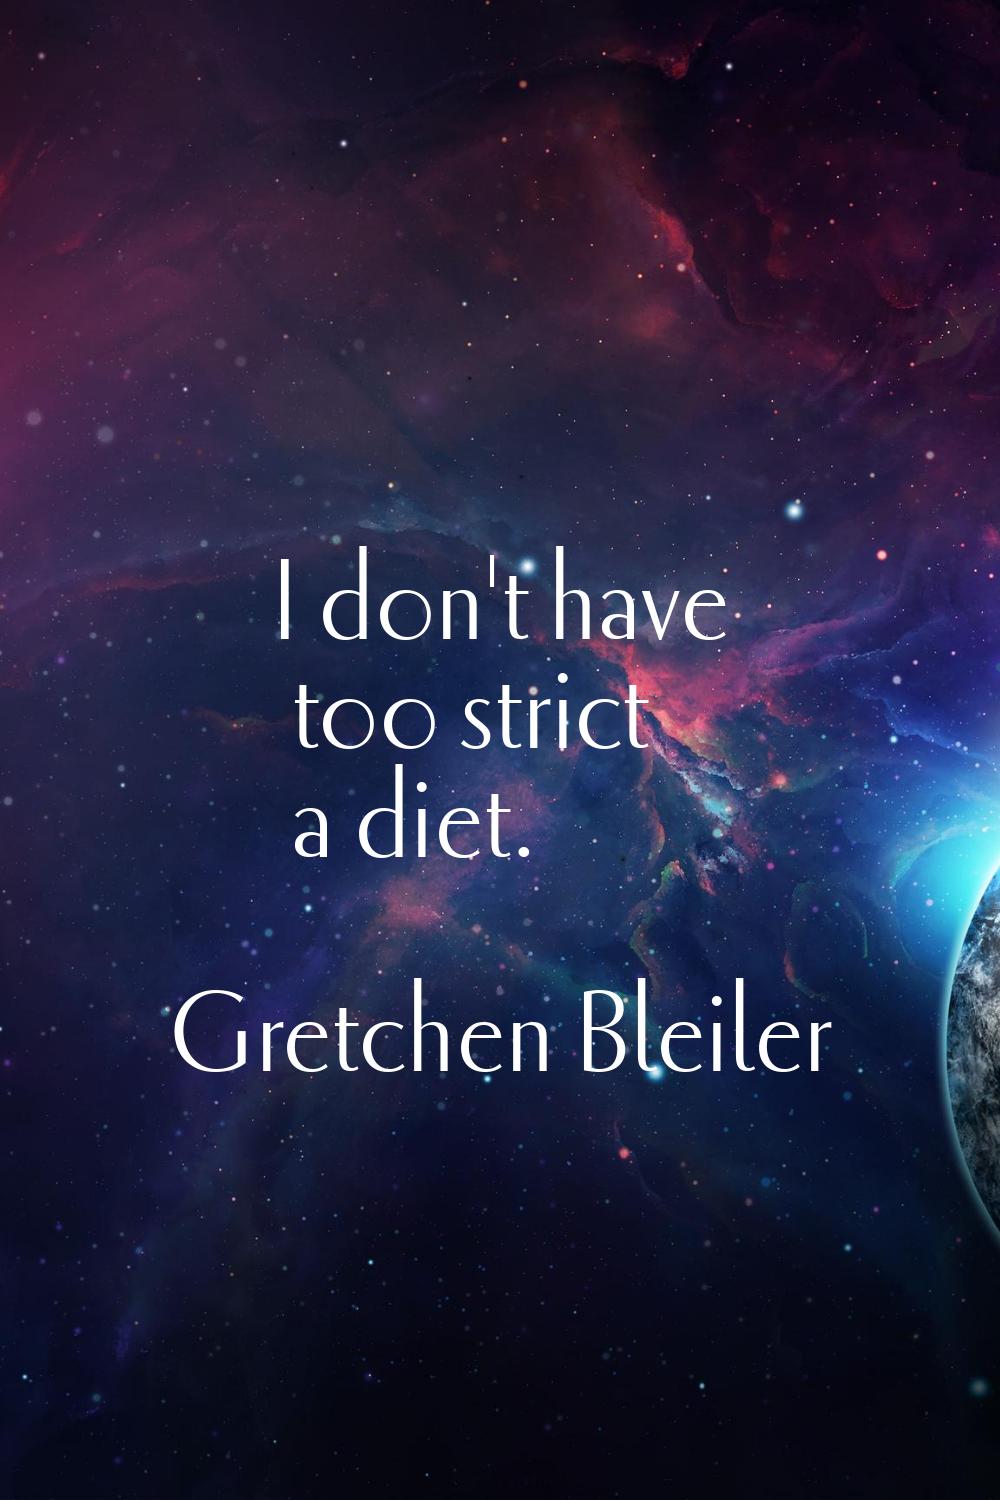 I don't have too strict a diet.